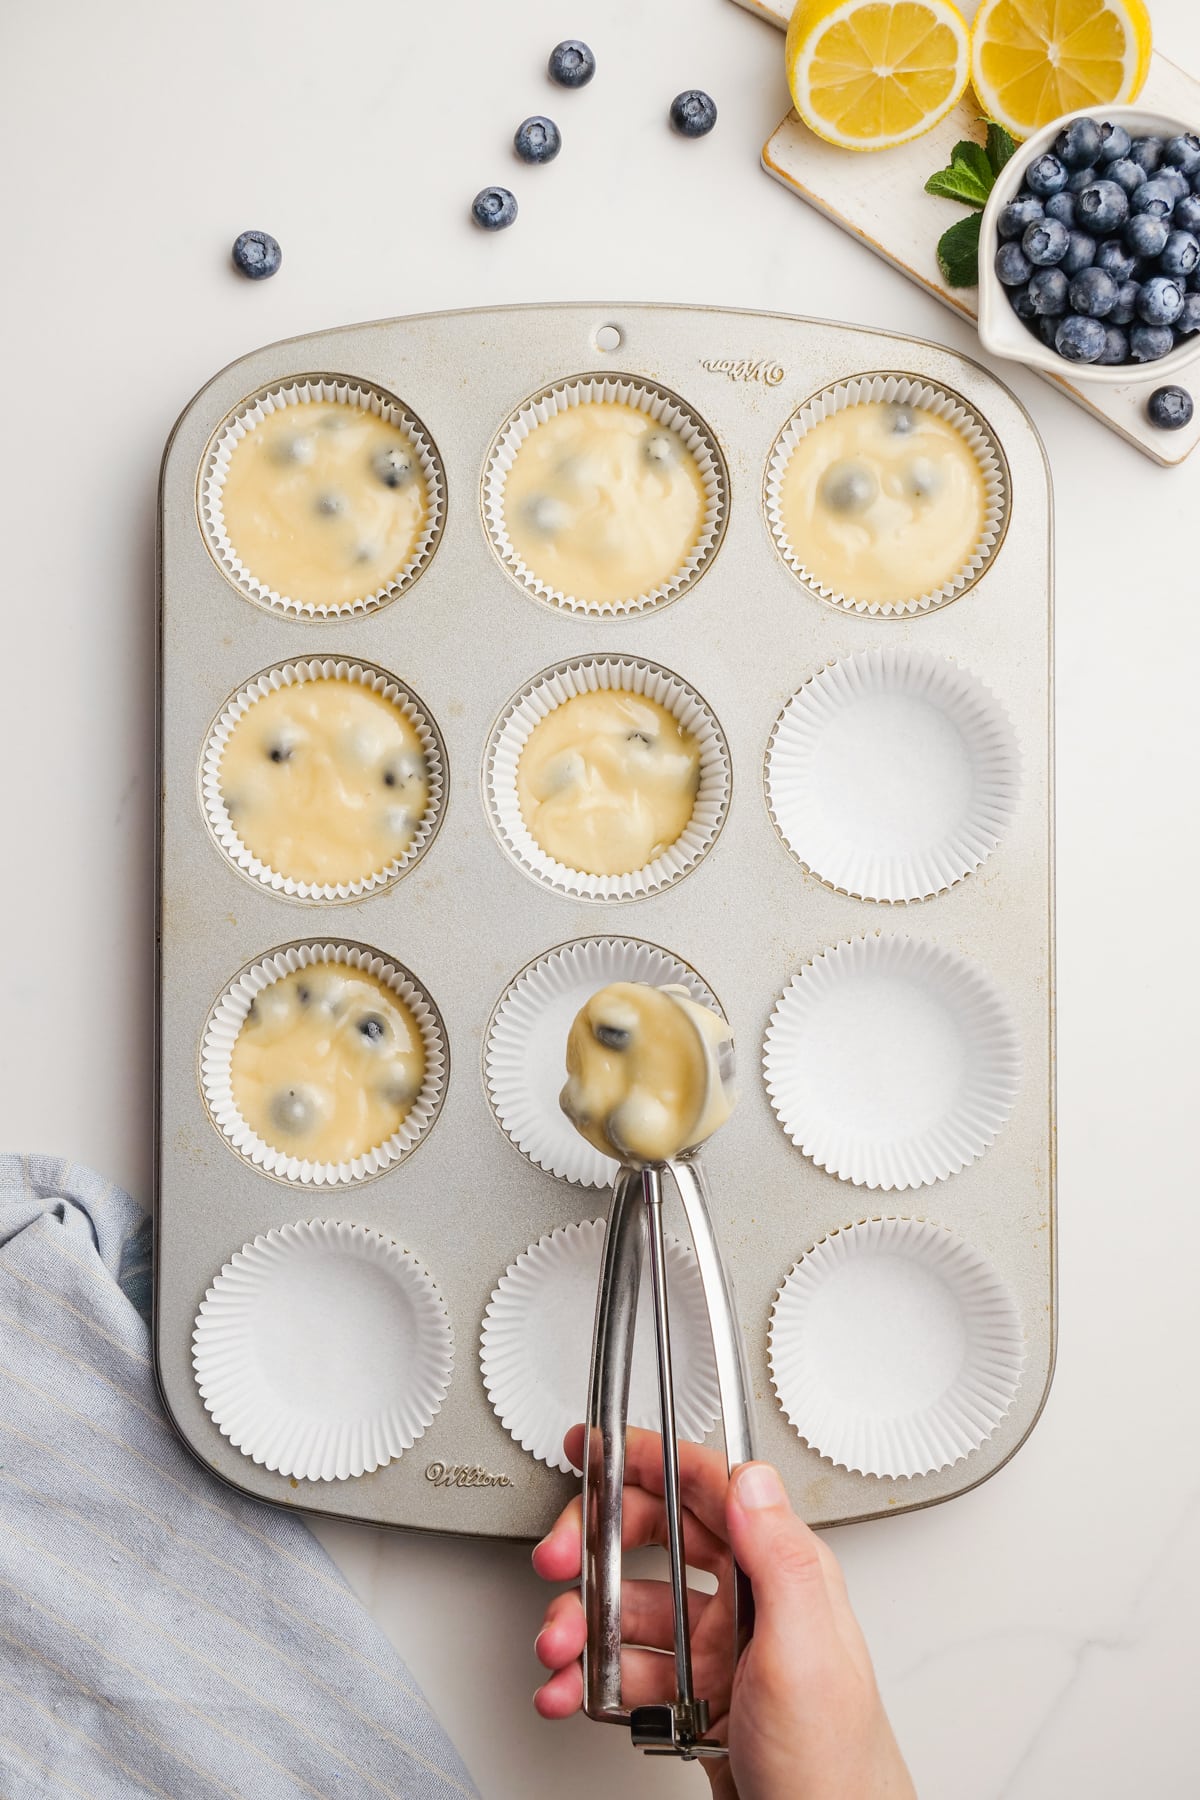 woman's hand scooping blueberry-muffins batter into cupcake pan